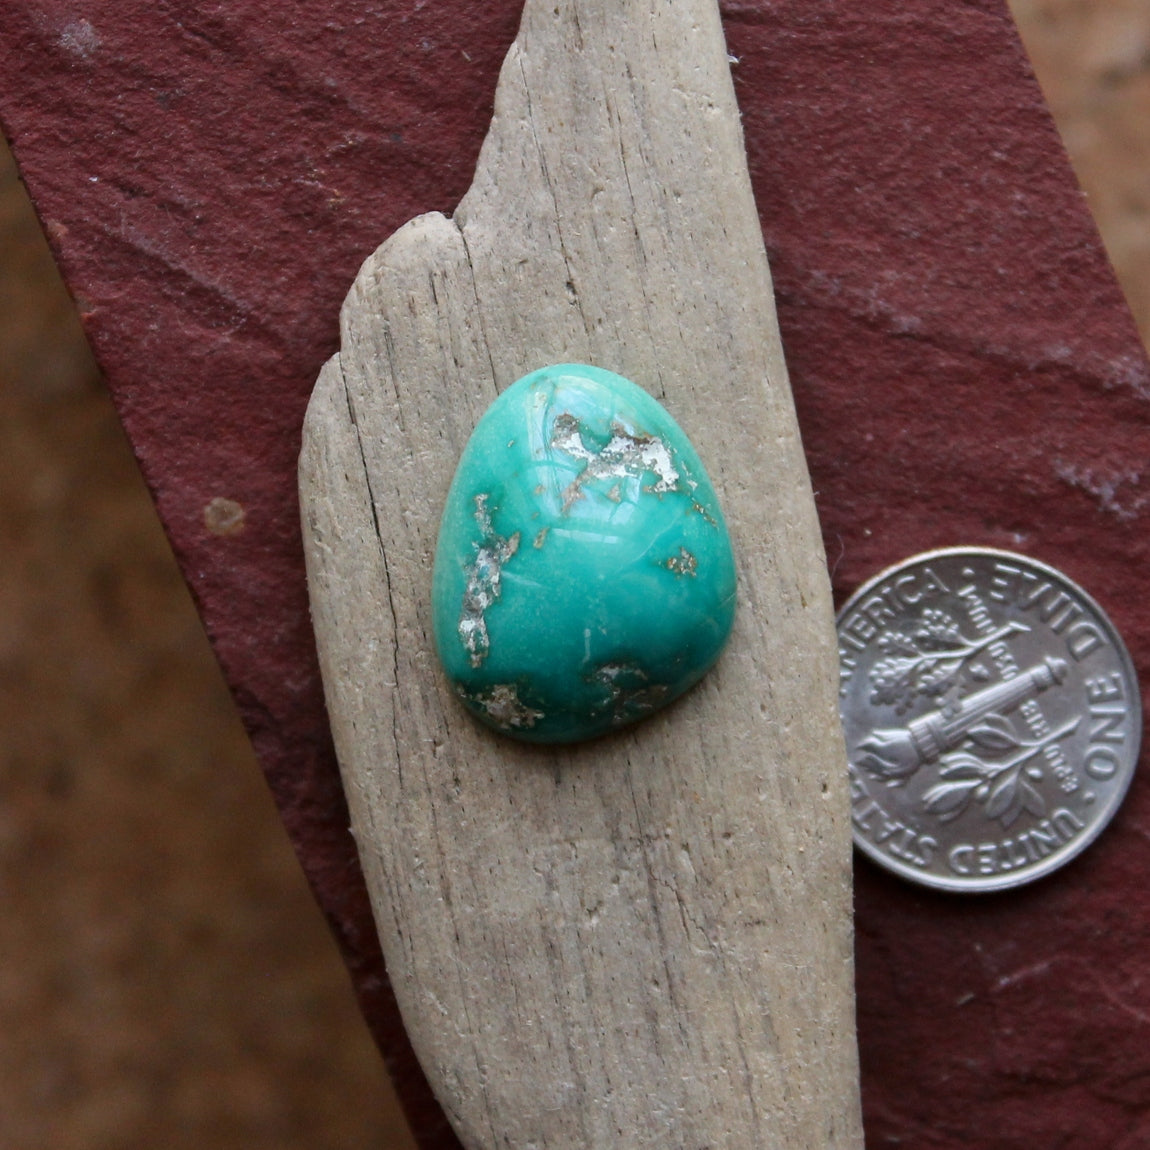 12 carat green Stone Mountain Turquoise cabochon with a high dome